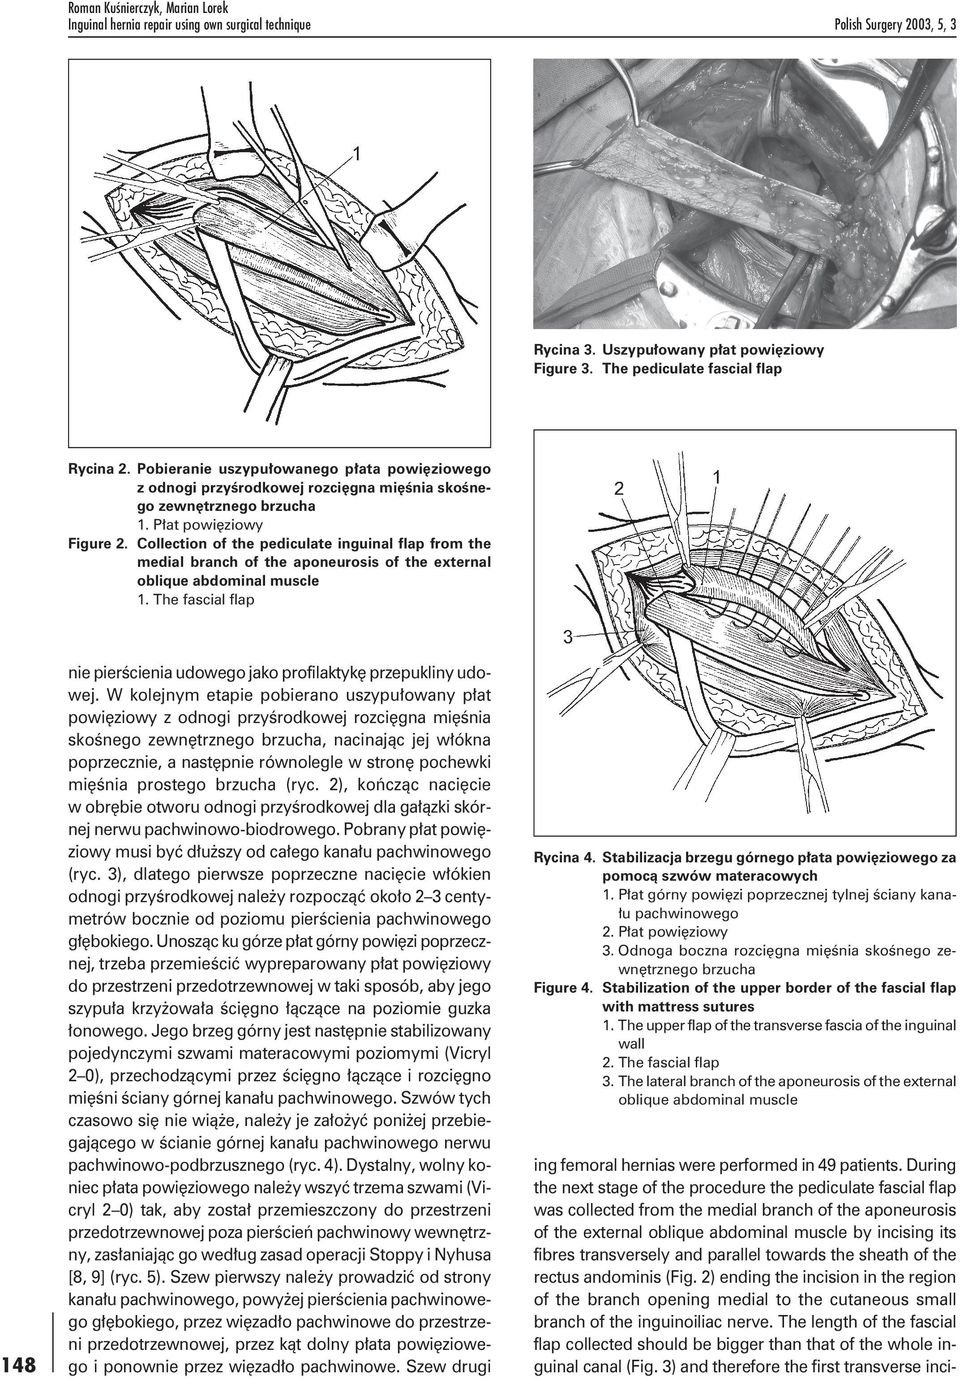 Collection of the pediculate inguinal flap from the medial branch of the aponeurosis of the external oblique abdominal muscle 1.